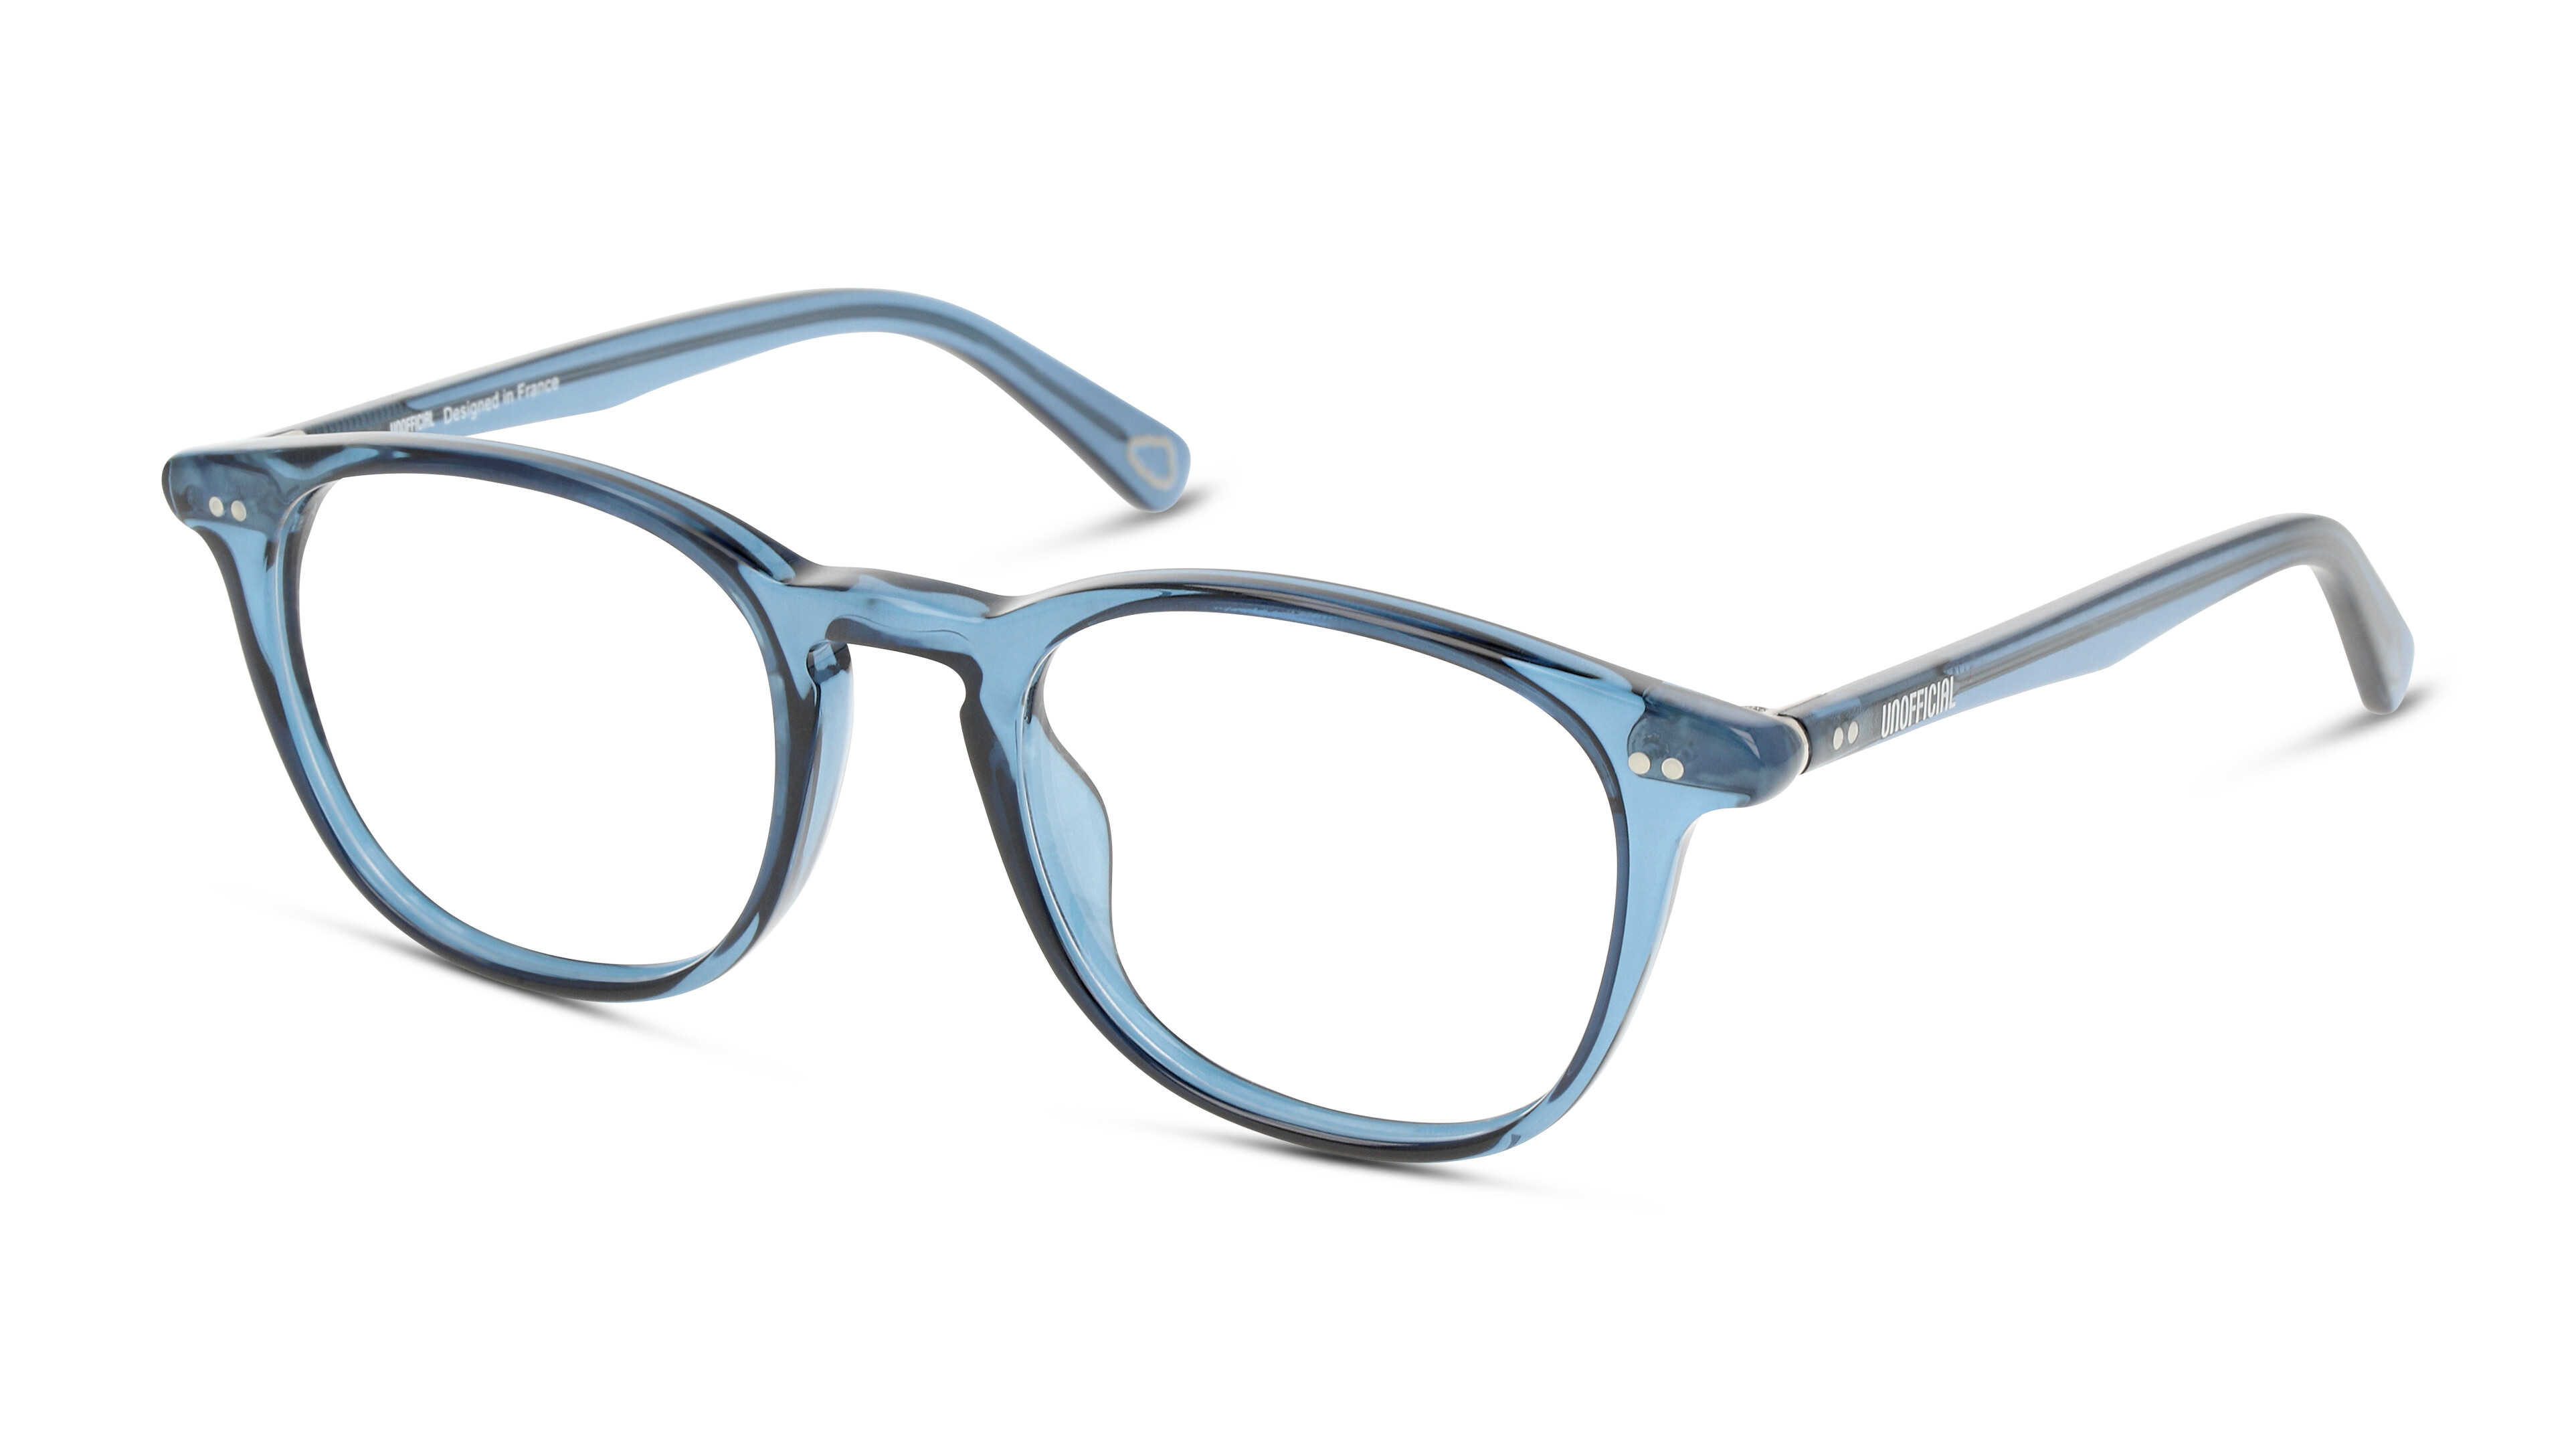 Angle_Left01 UNOFFICIAL UNOM0186 LL00 Brille Blau